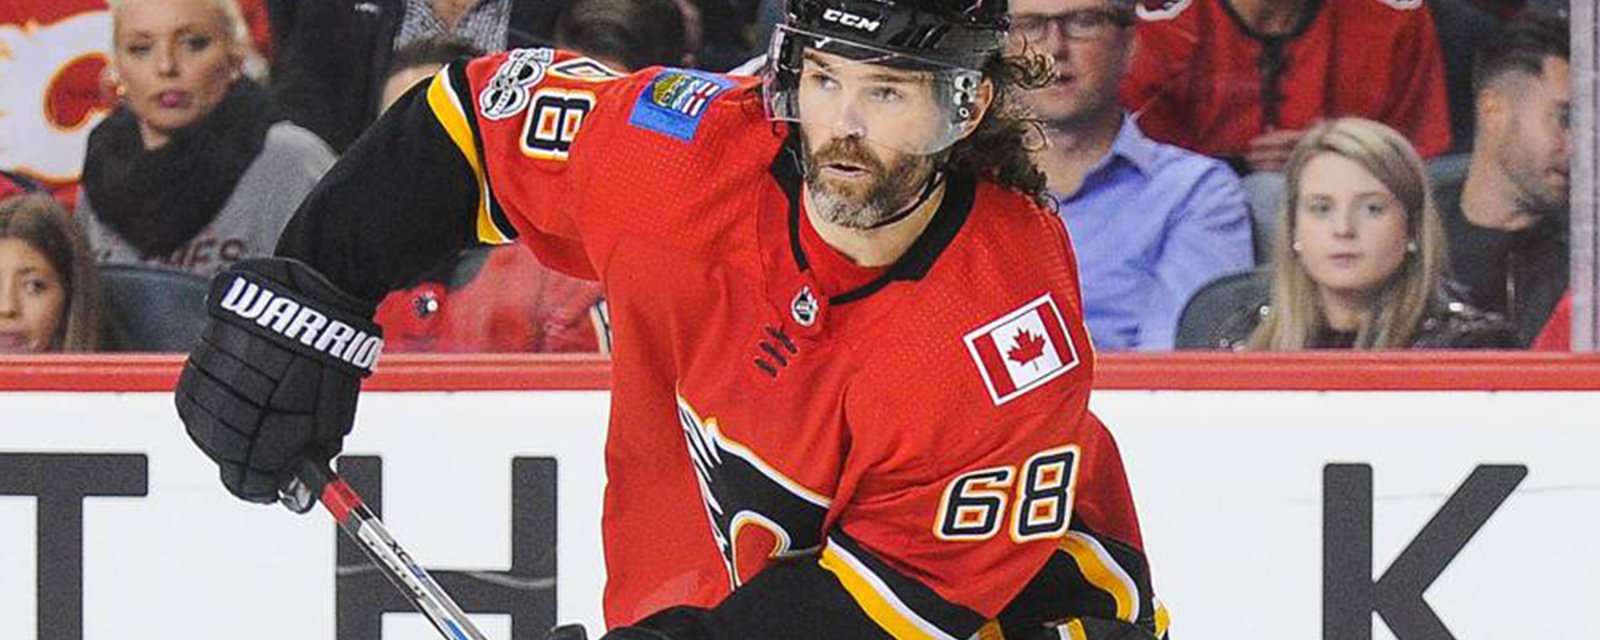 Report: Jagr makes surprising admission about Flames contract negotiations